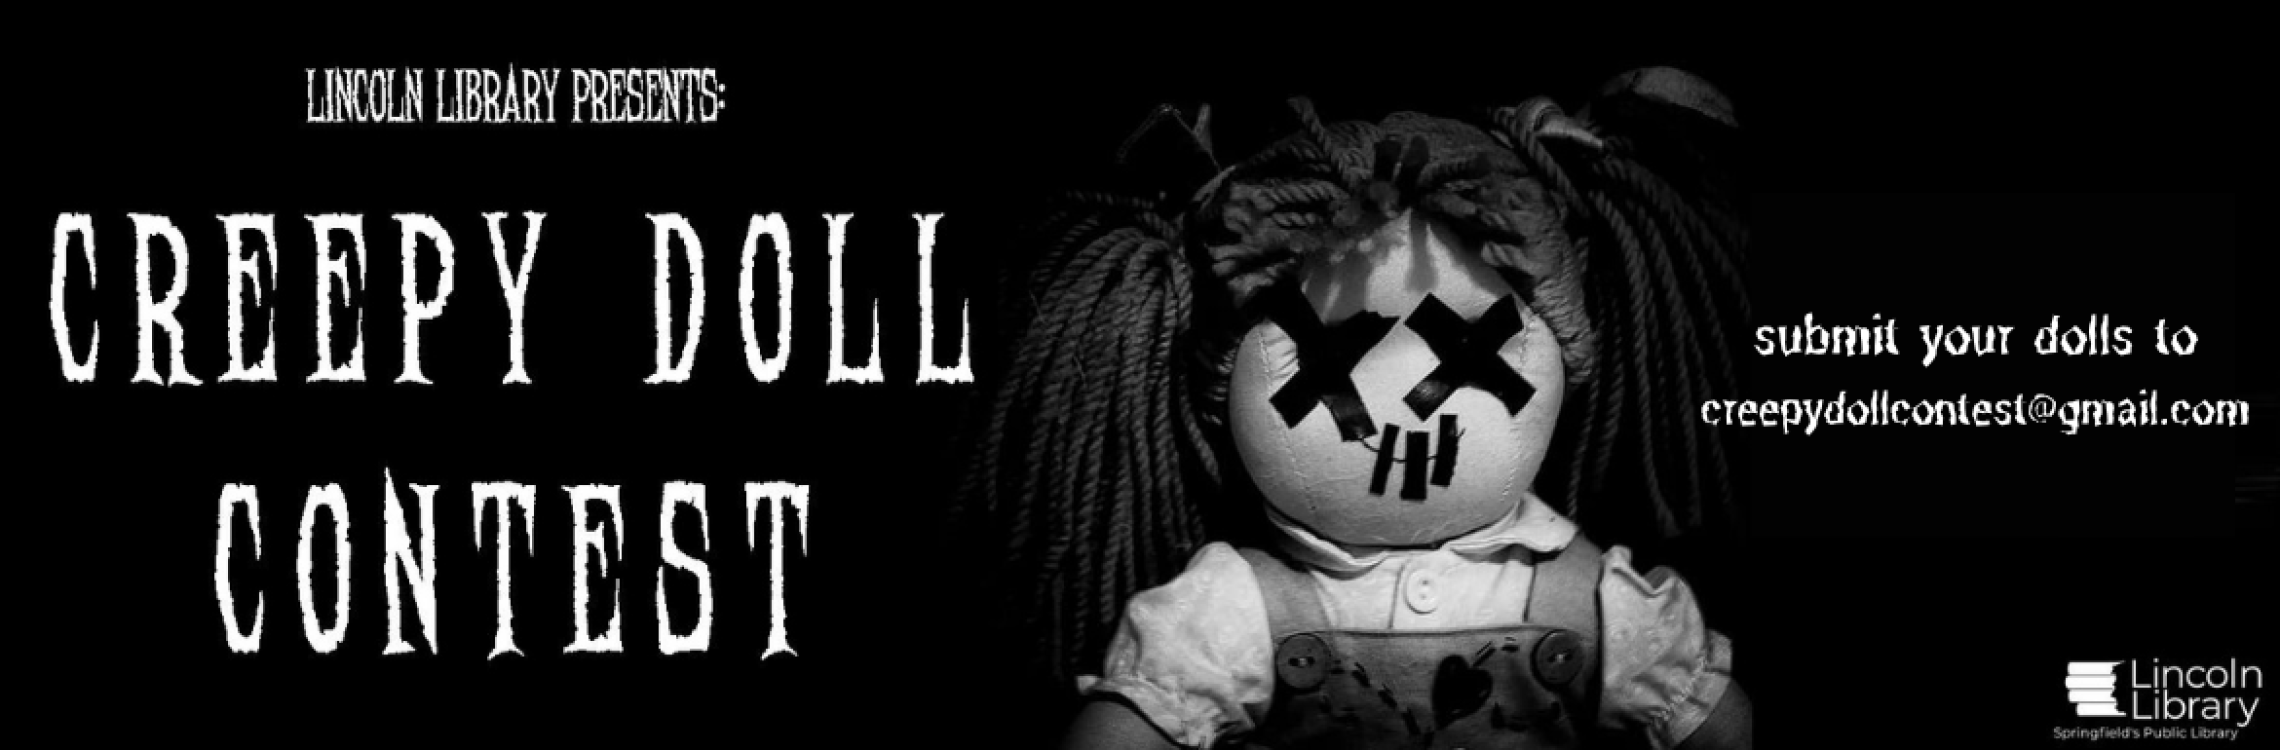 Submit your creepy dolls to creepydollcontest@gmail.com